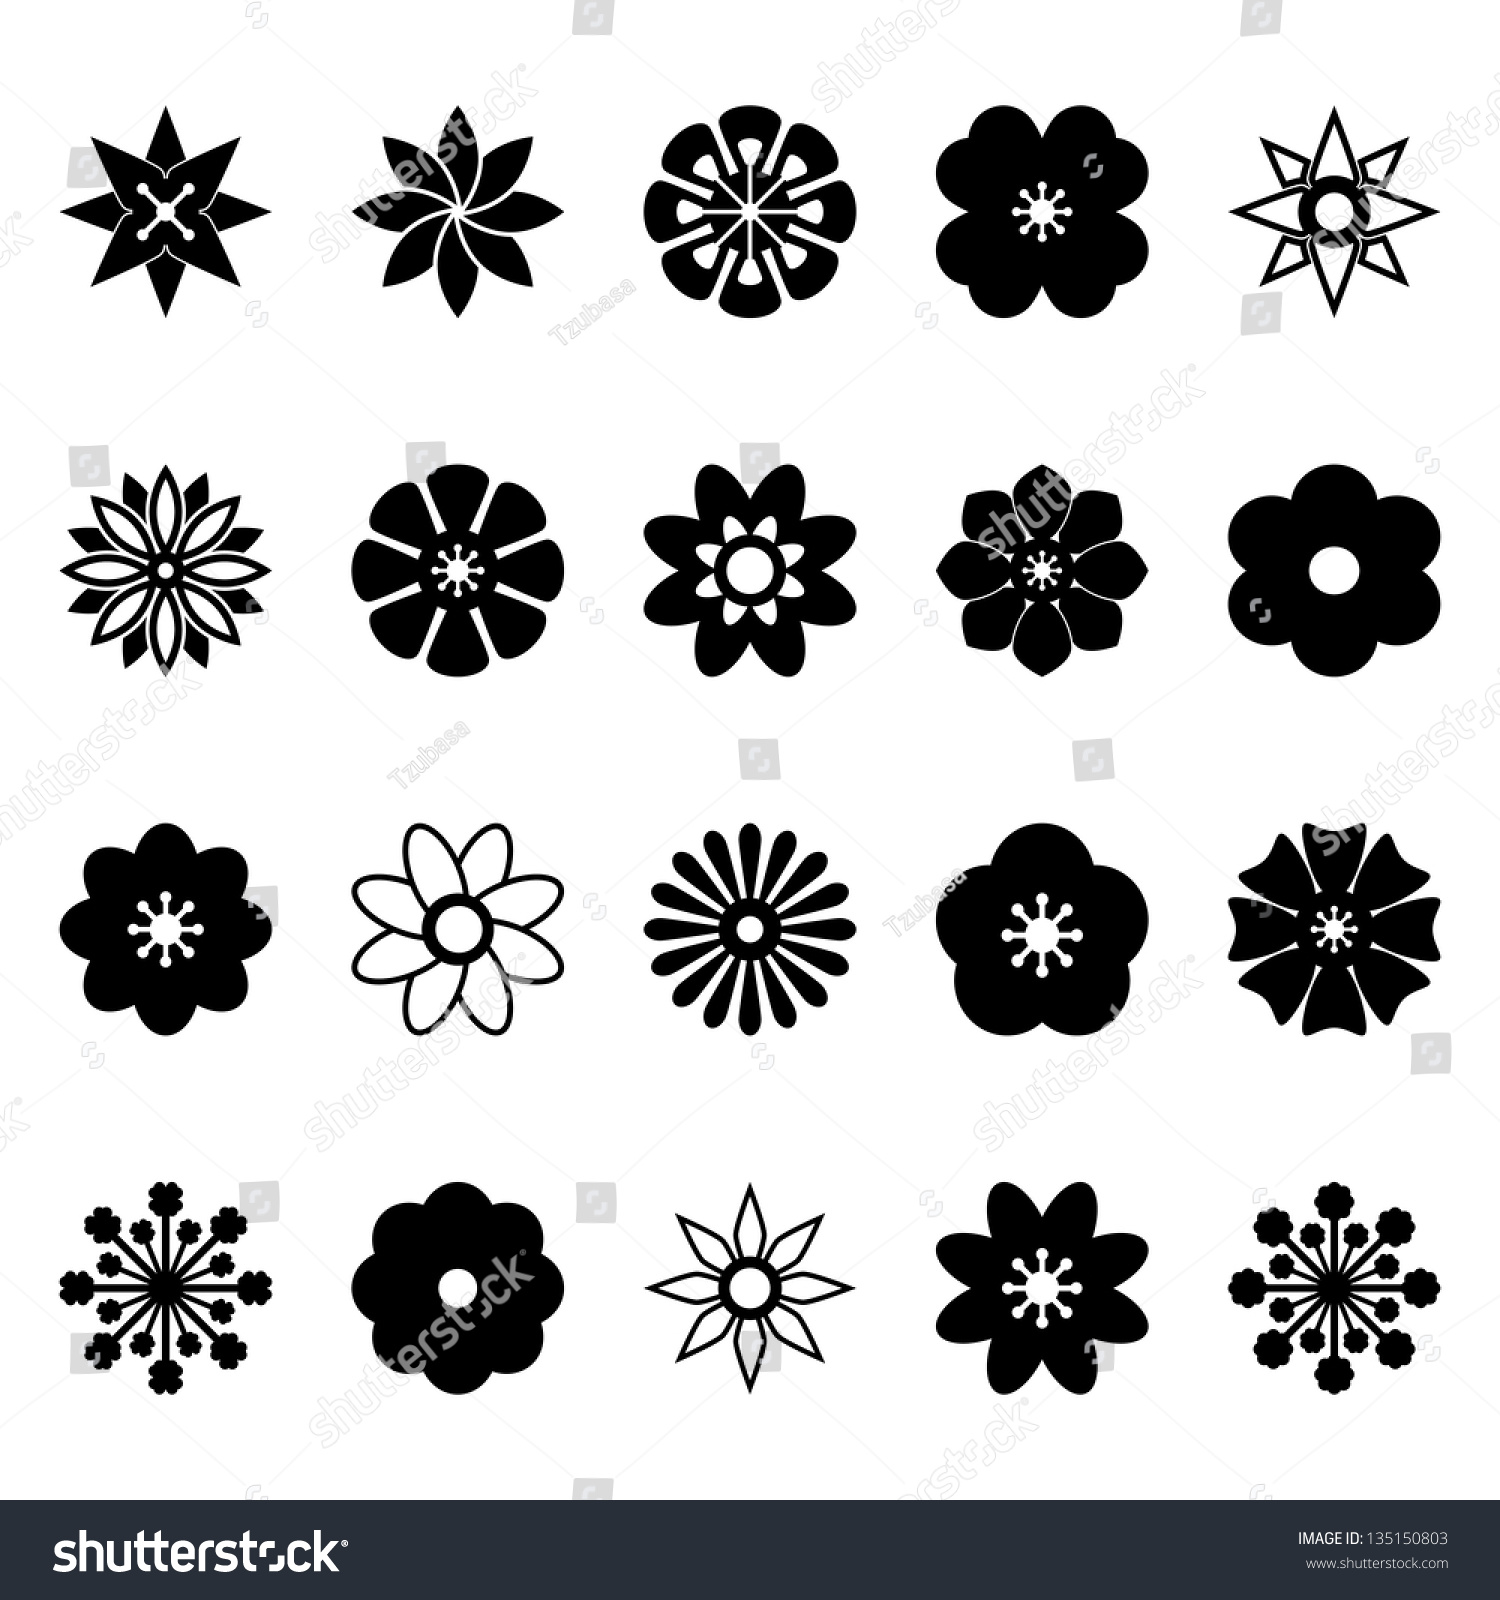 flower clipart black and white vector free download - photo #18